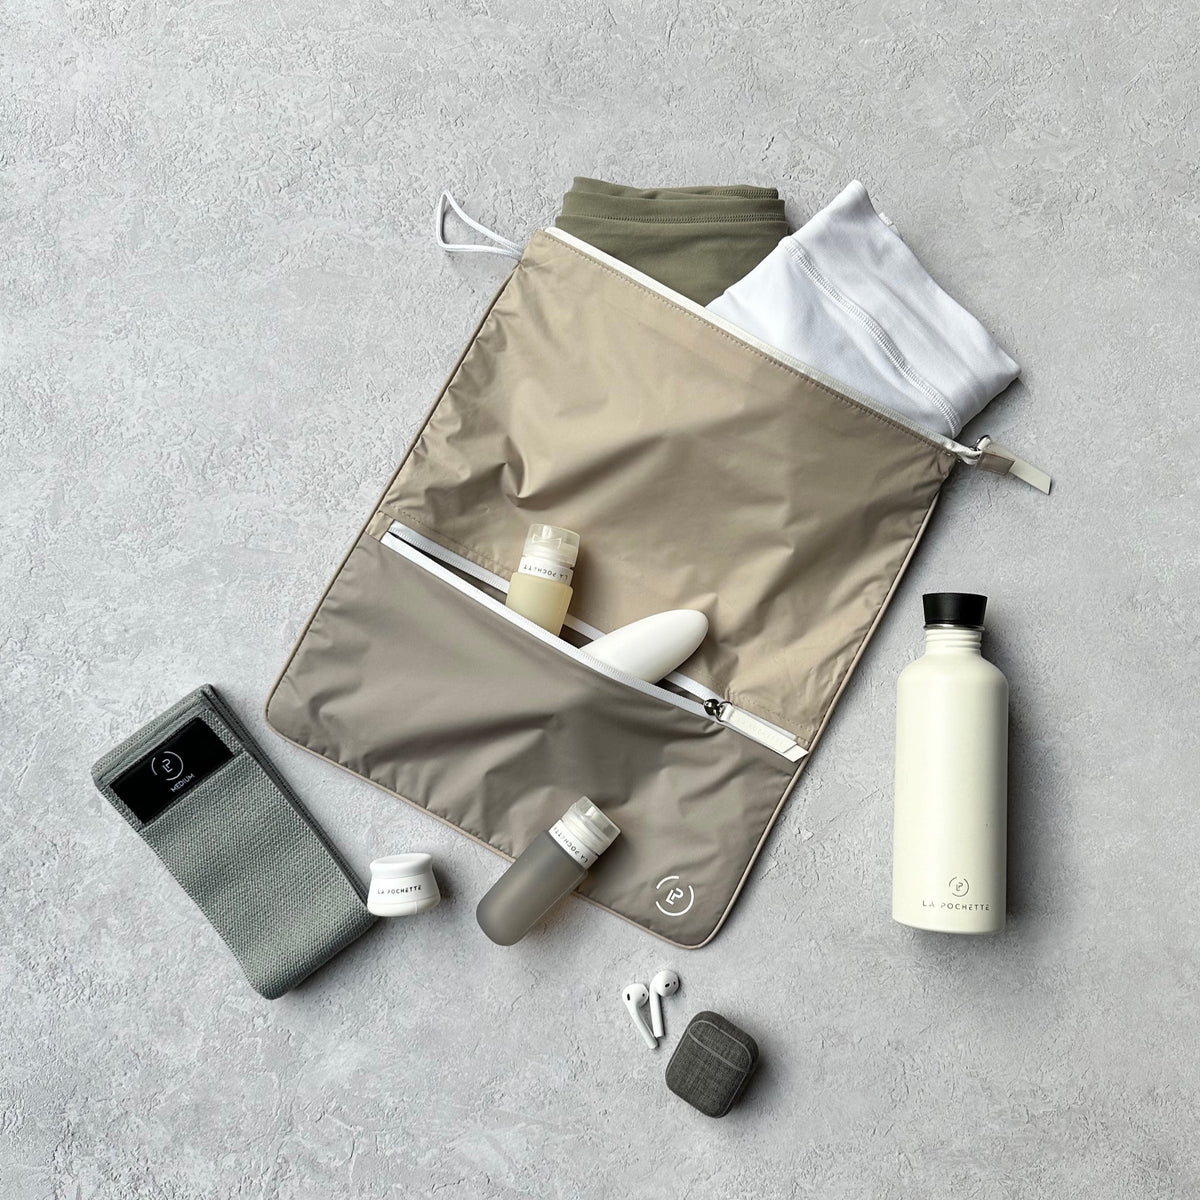 sweat bag with resistance band, water bottle and travel bottles